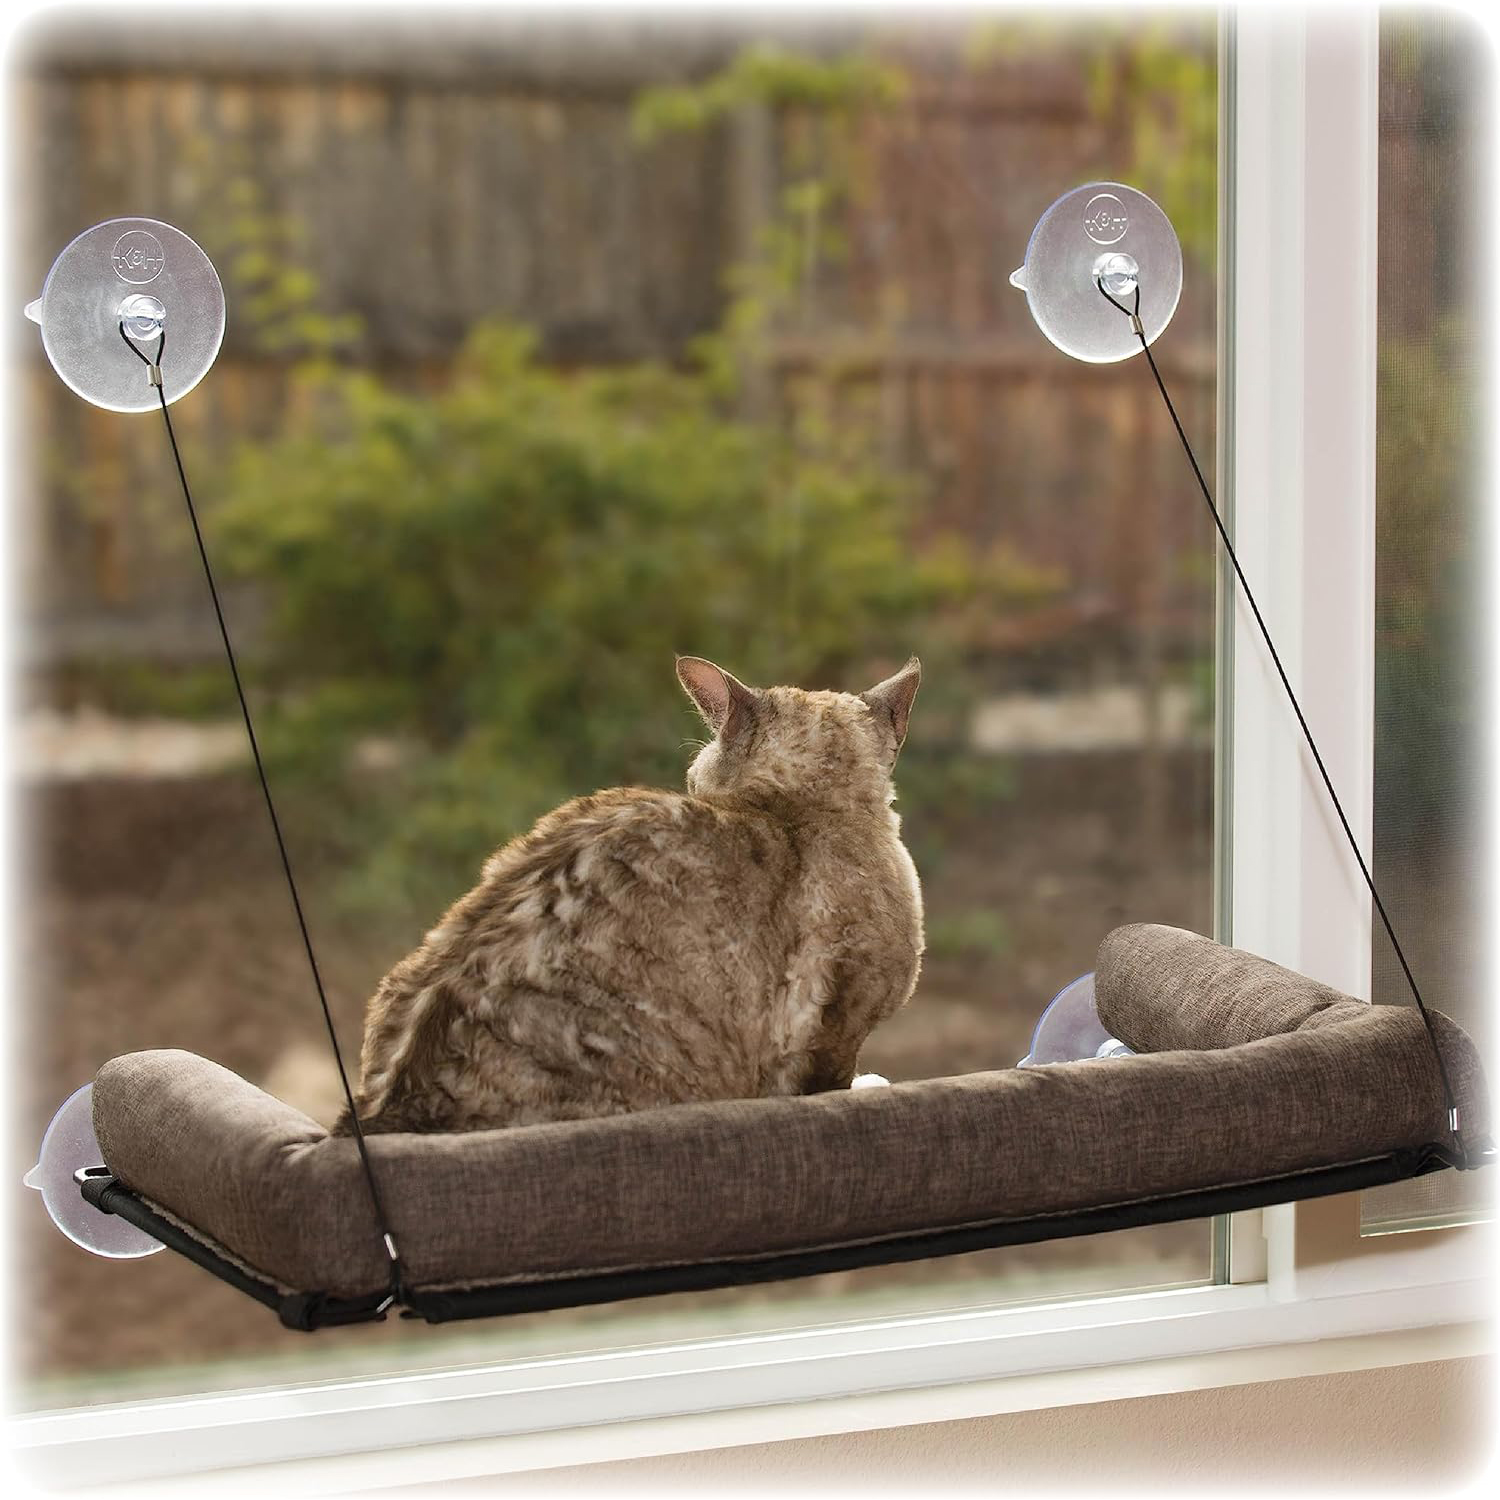 K&H Pet Products Deluxe EZ Mount Kitty Sill Window Sill Cat Bed